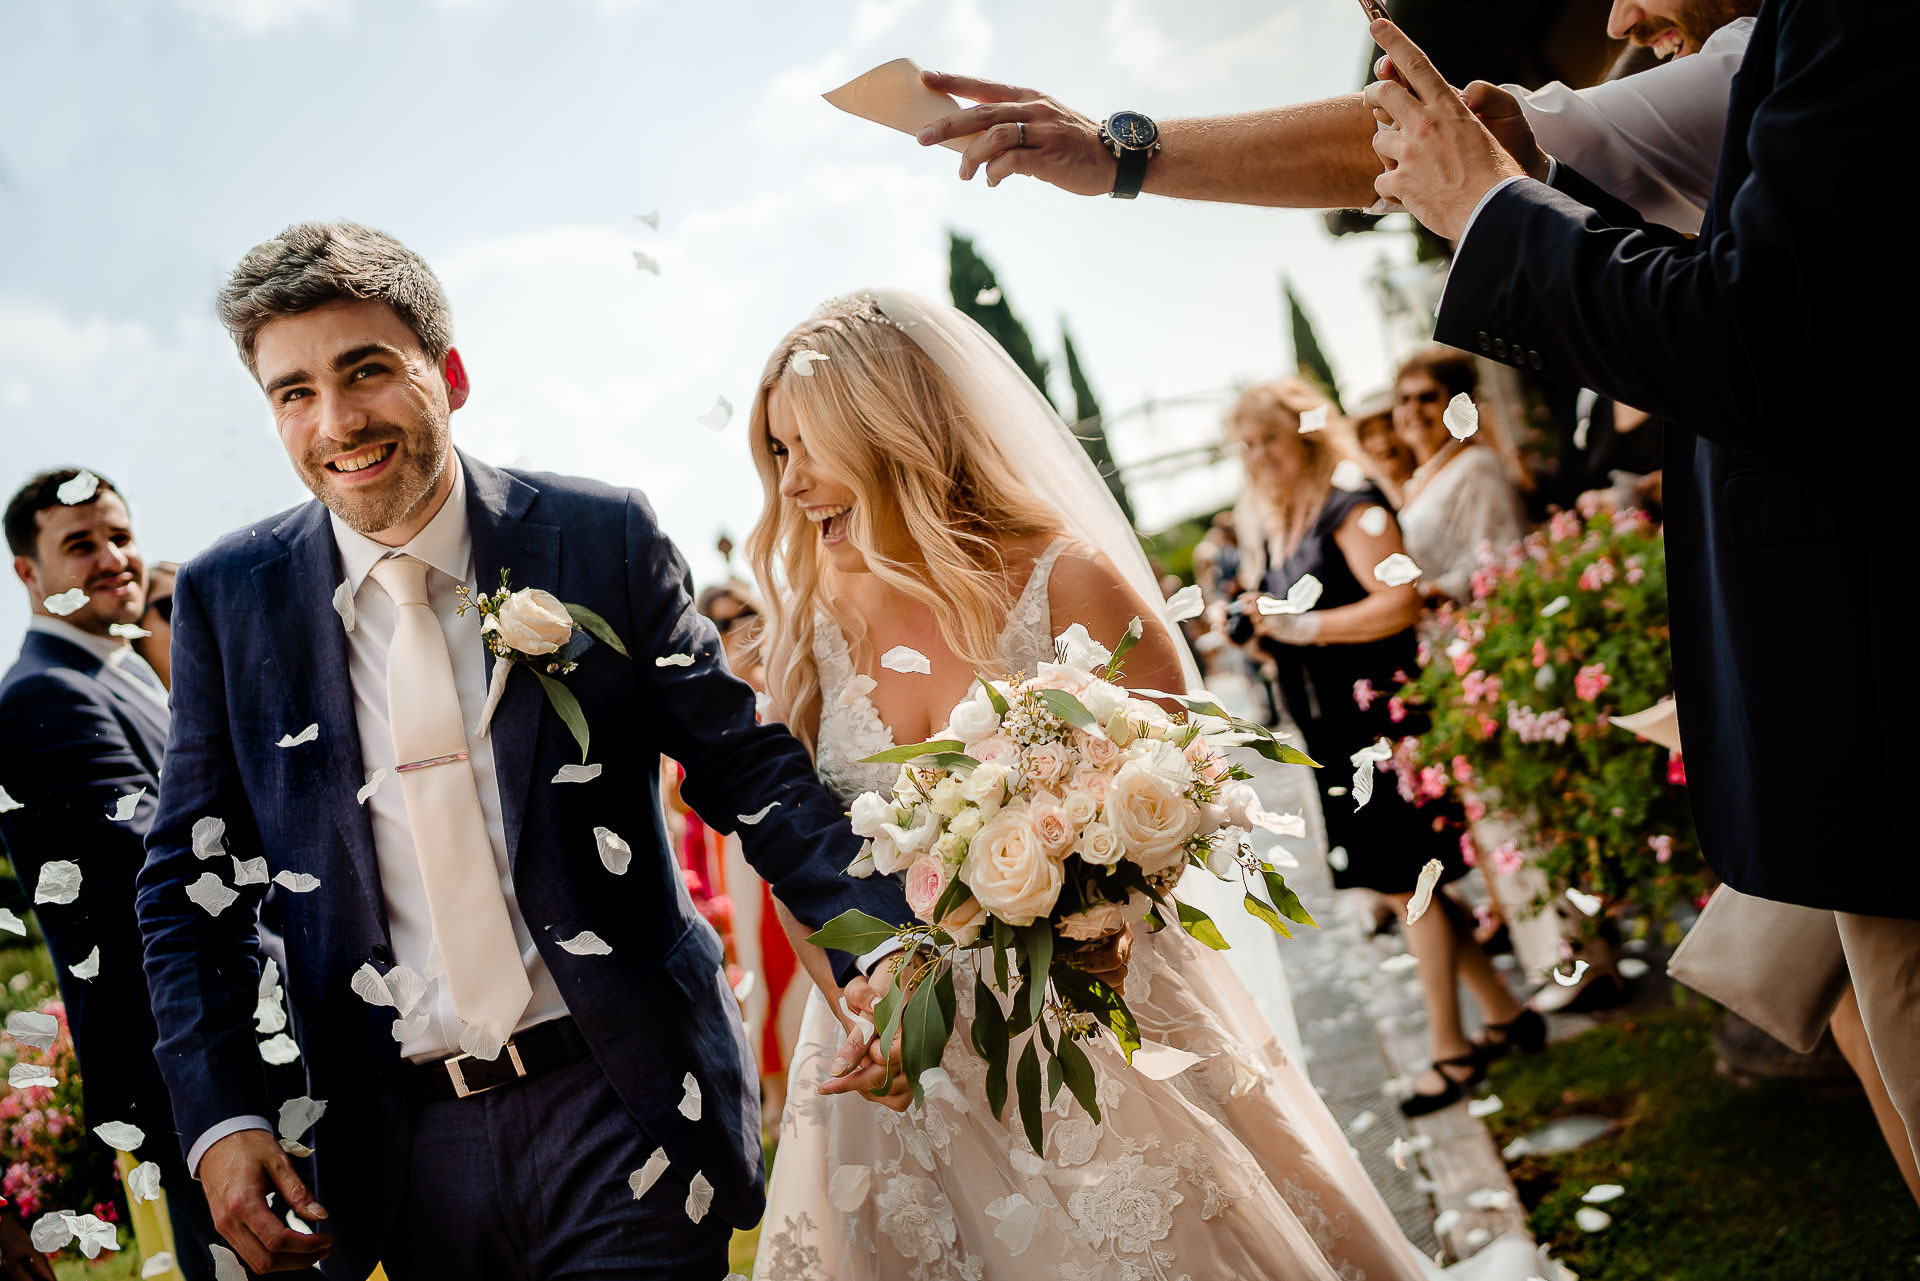 Classic confetti moment at a modern wedding by Liam Collard Photography